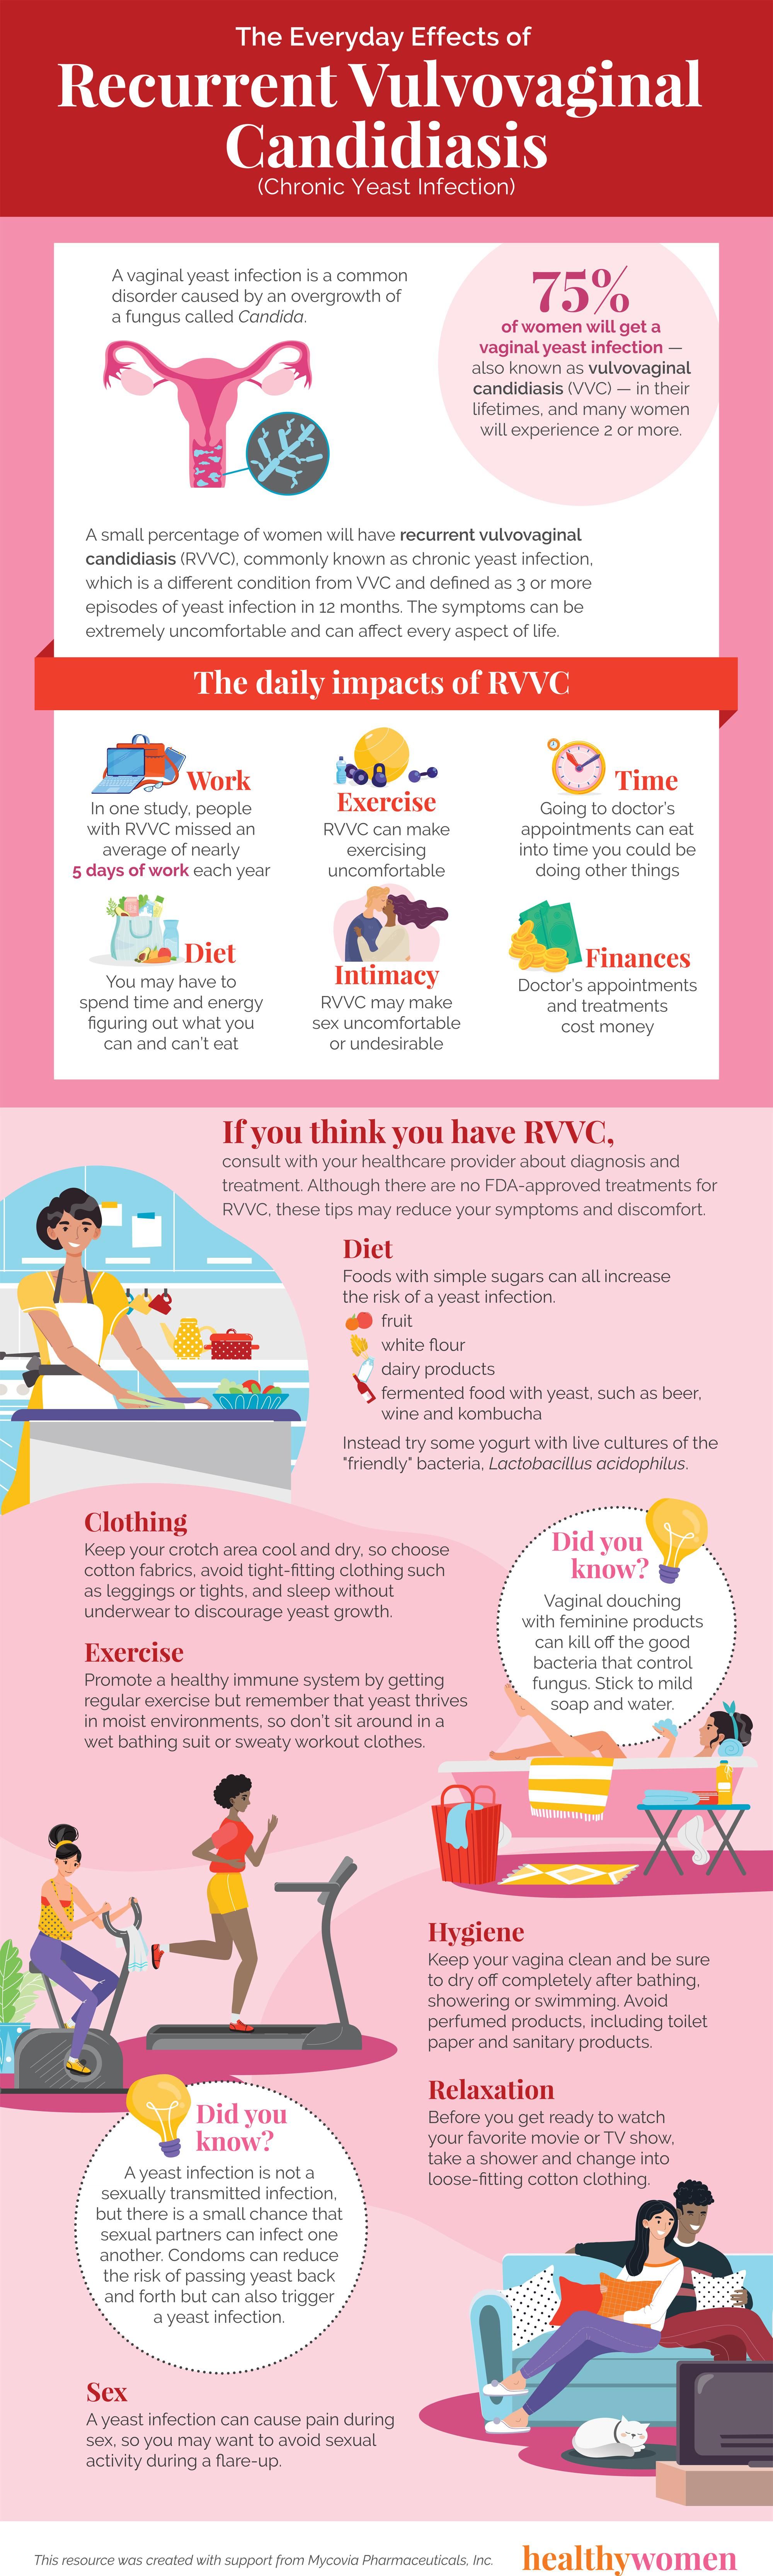 Infographic The Everyday Effects of Recurrent Vulvovaginal Candidiasis (Chronic Yeast Infection). Click the image to open the PDF